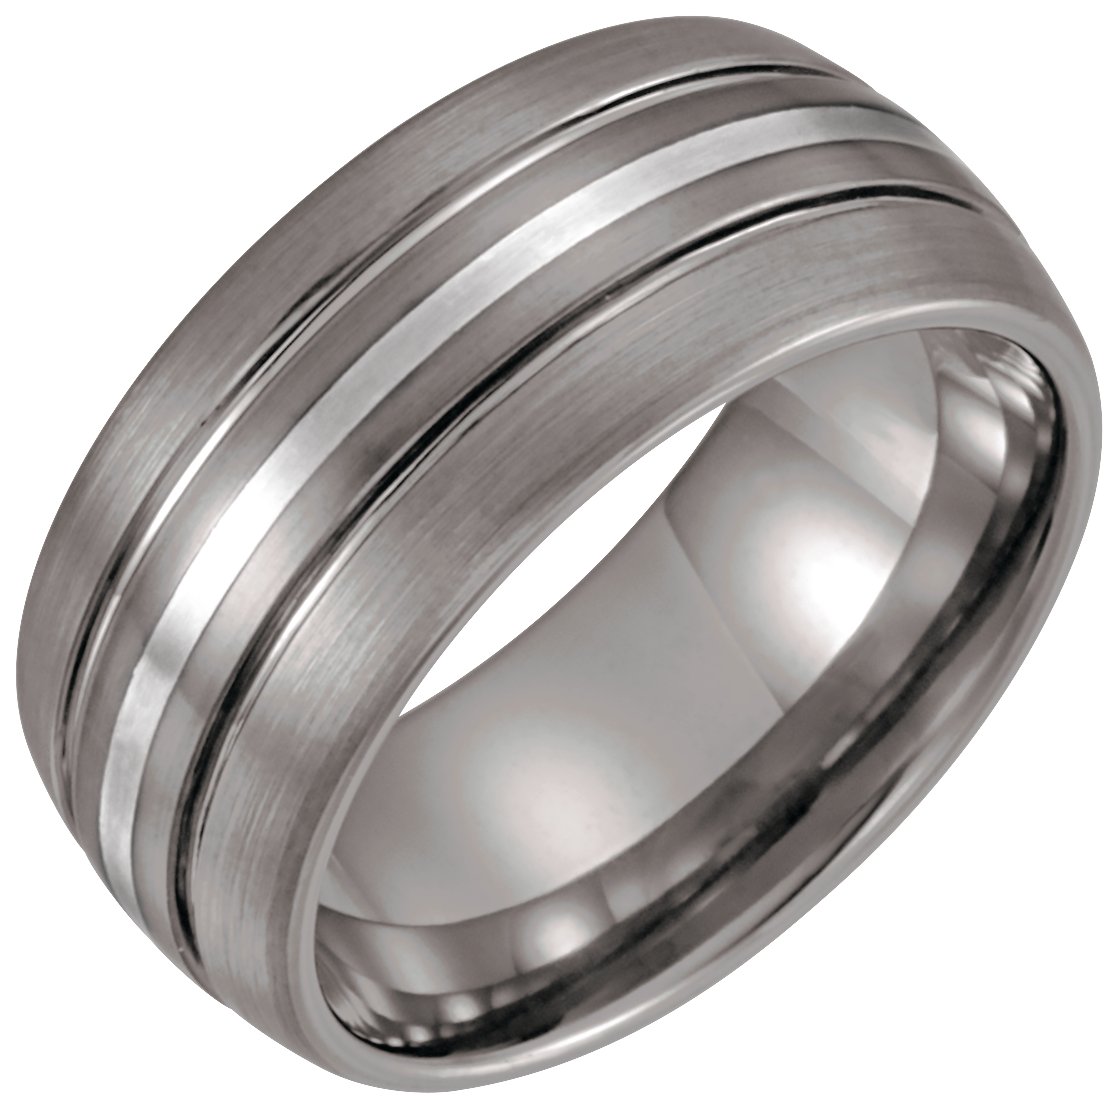 Tungsten & Sterling Silver 10 mm Grooved Band Size 9.5